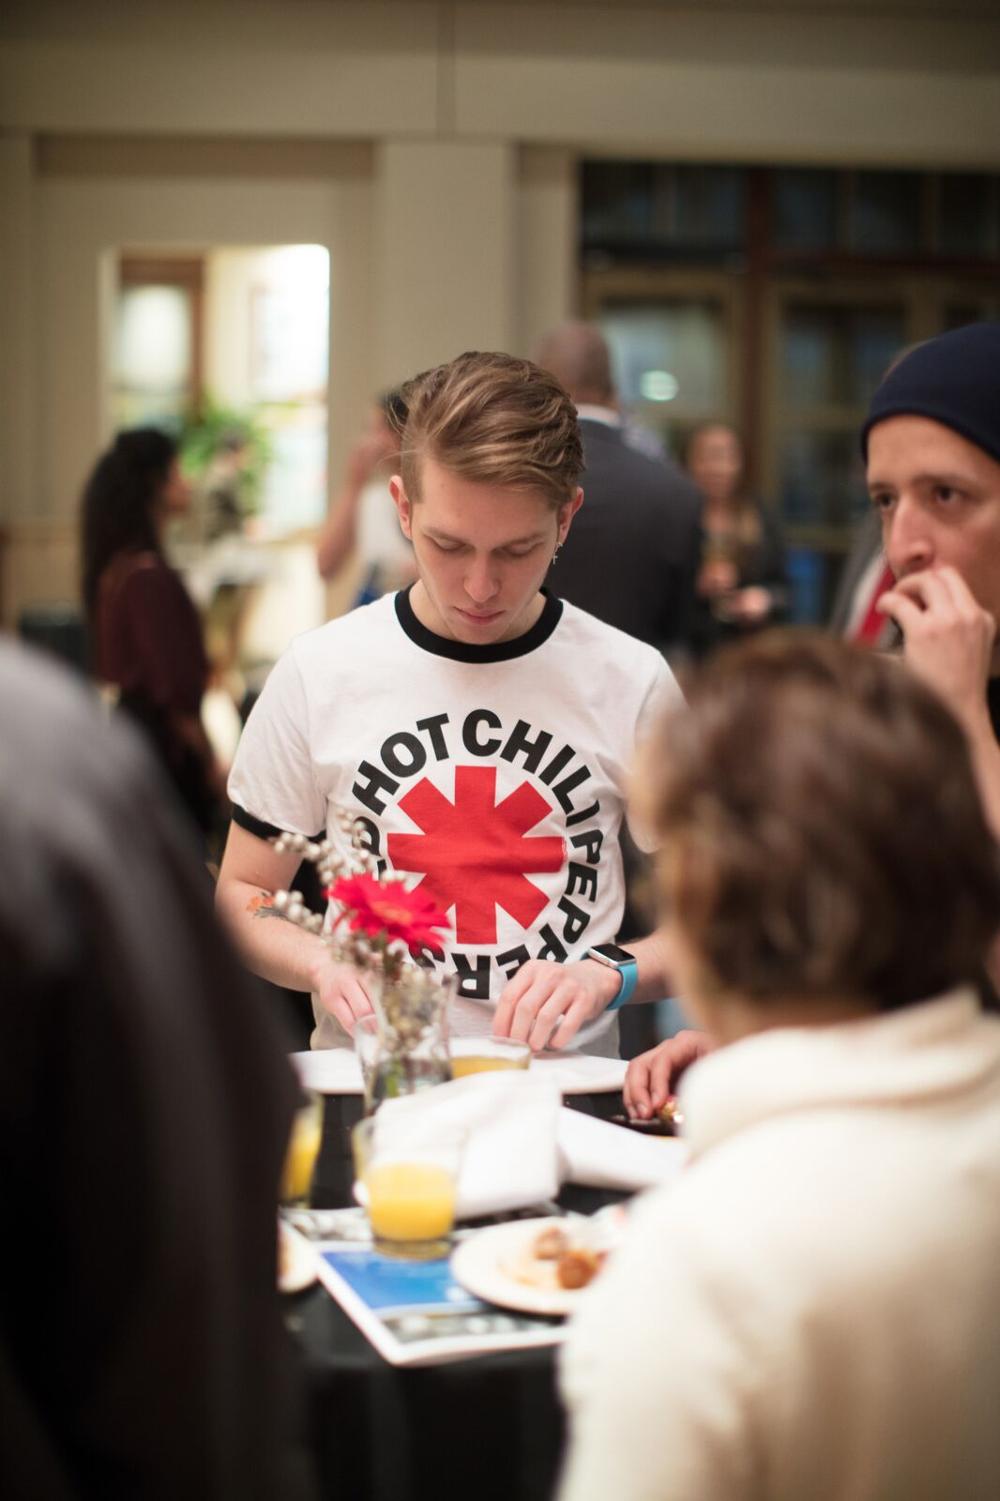 A person in a Red Hot Chili Peppers shirt looking at something on a small table